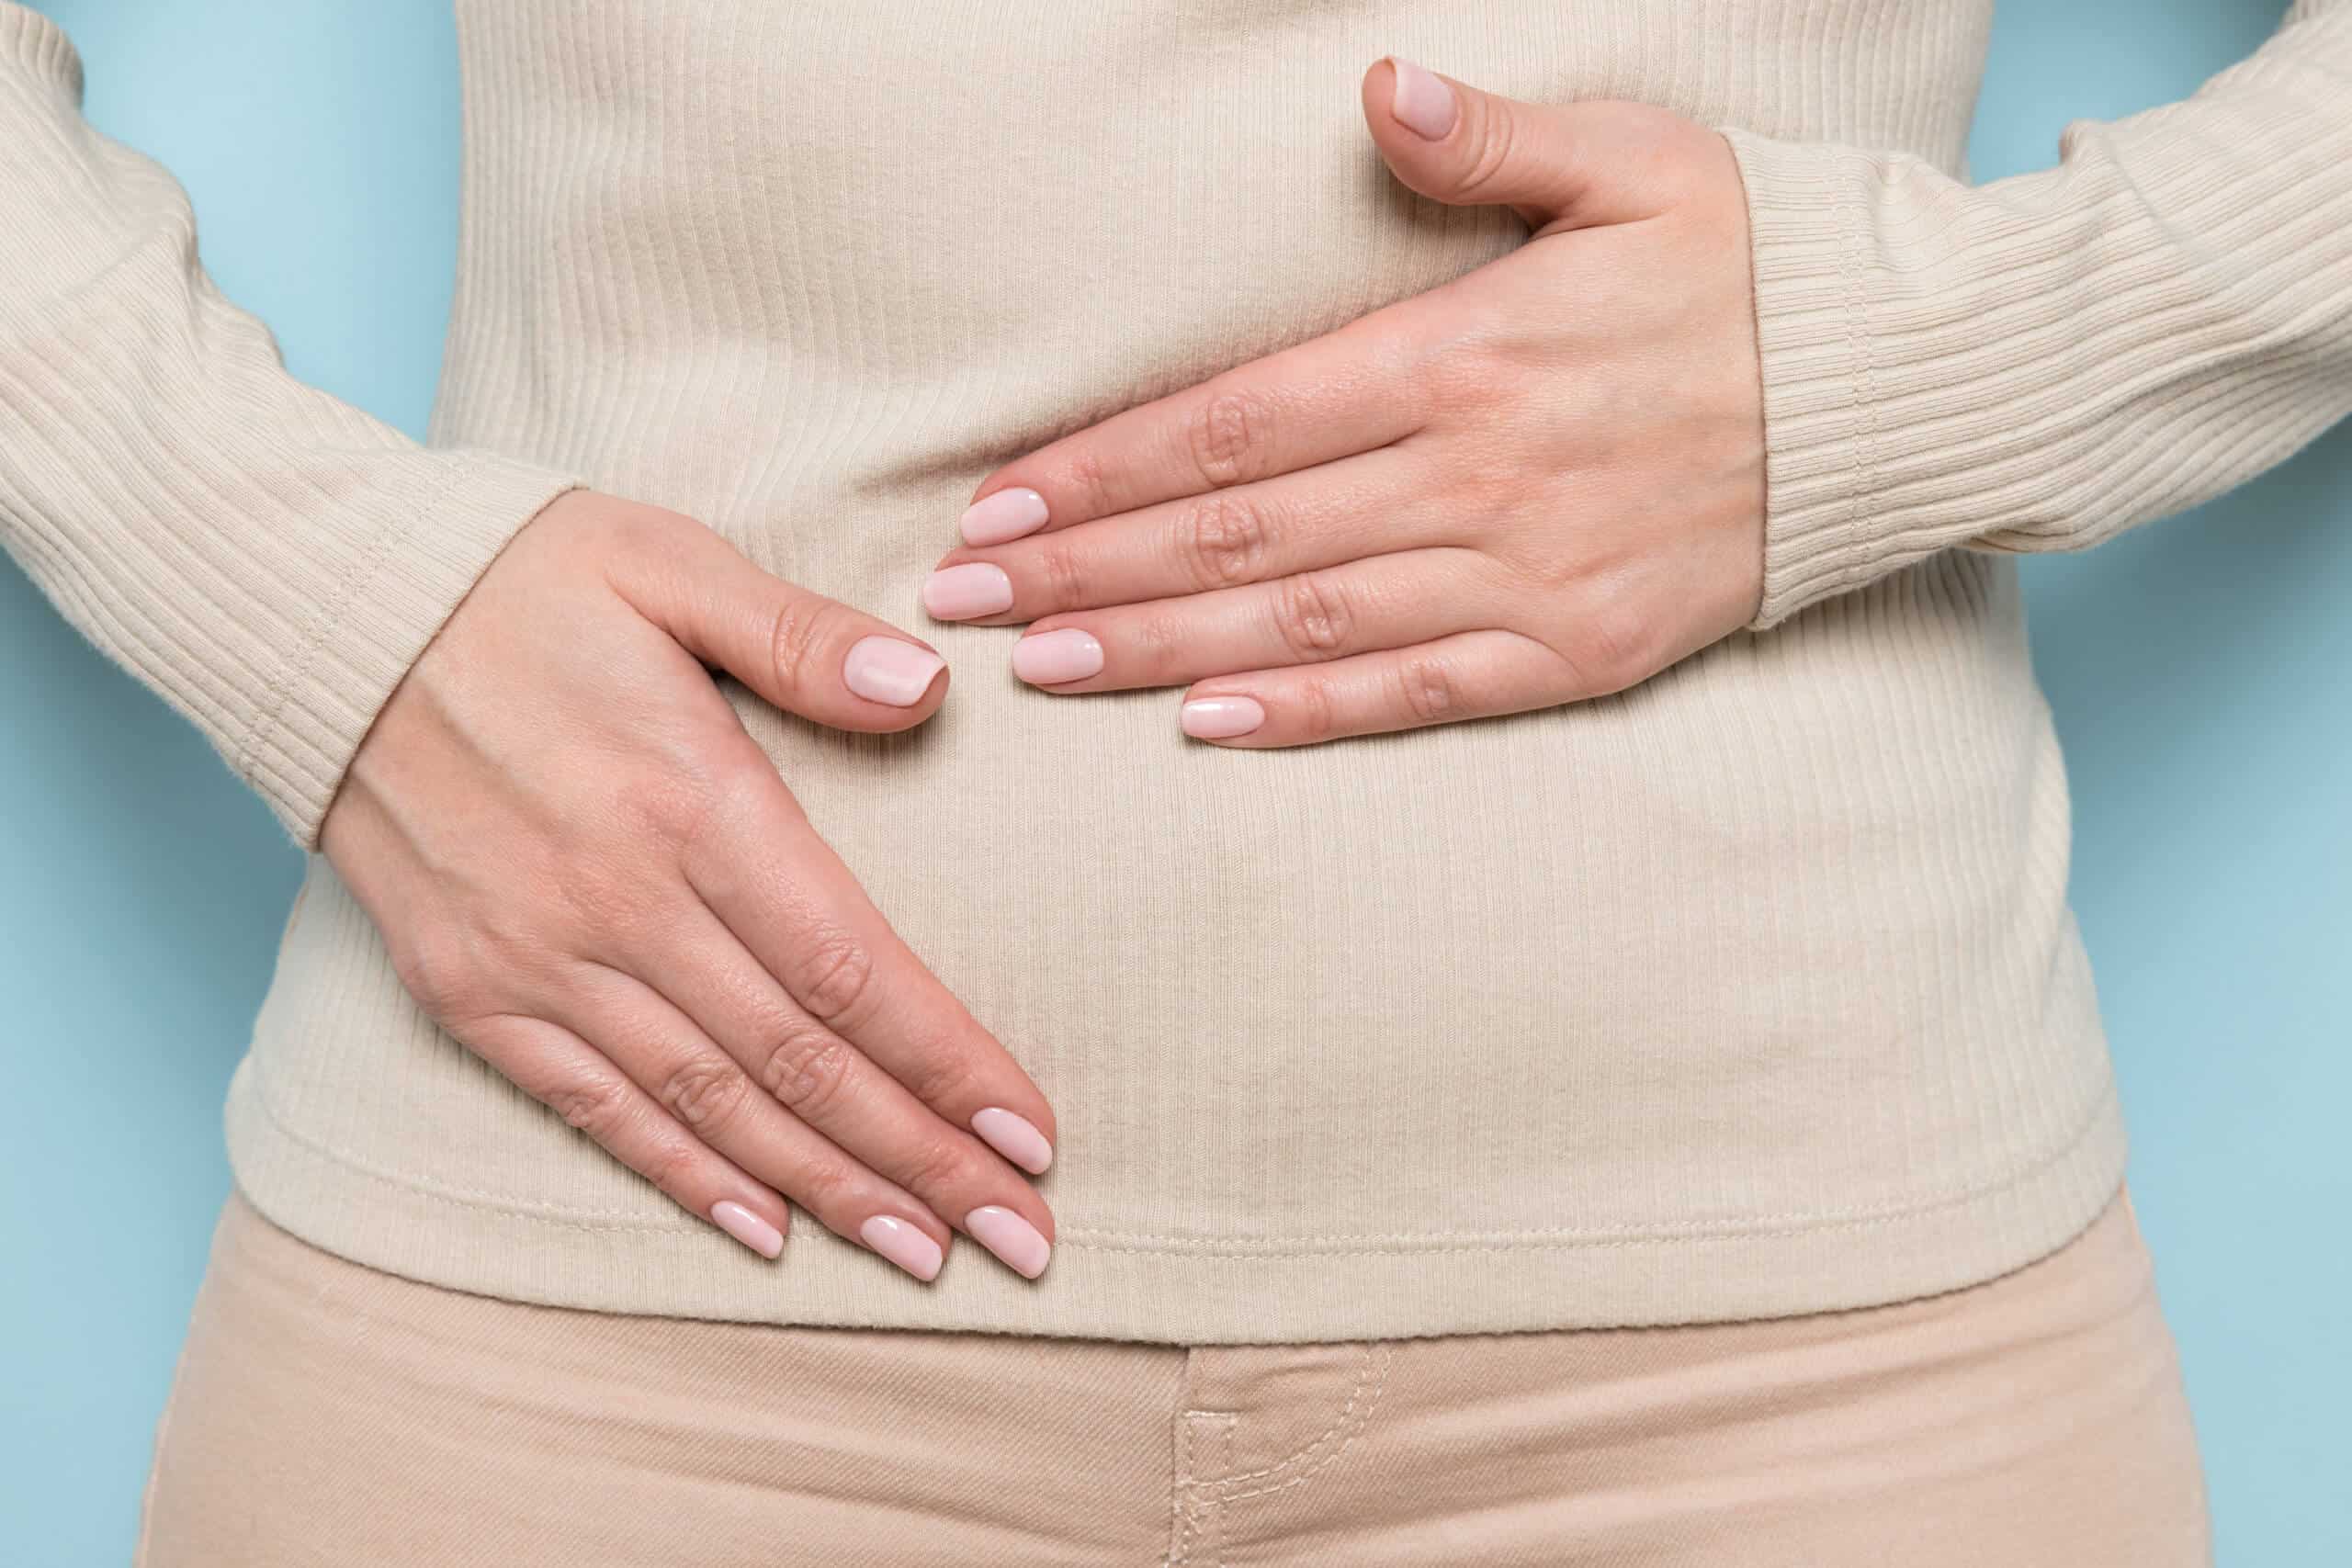 PCOS & Bloating: Why does it happen and how manage it - Fertility Family